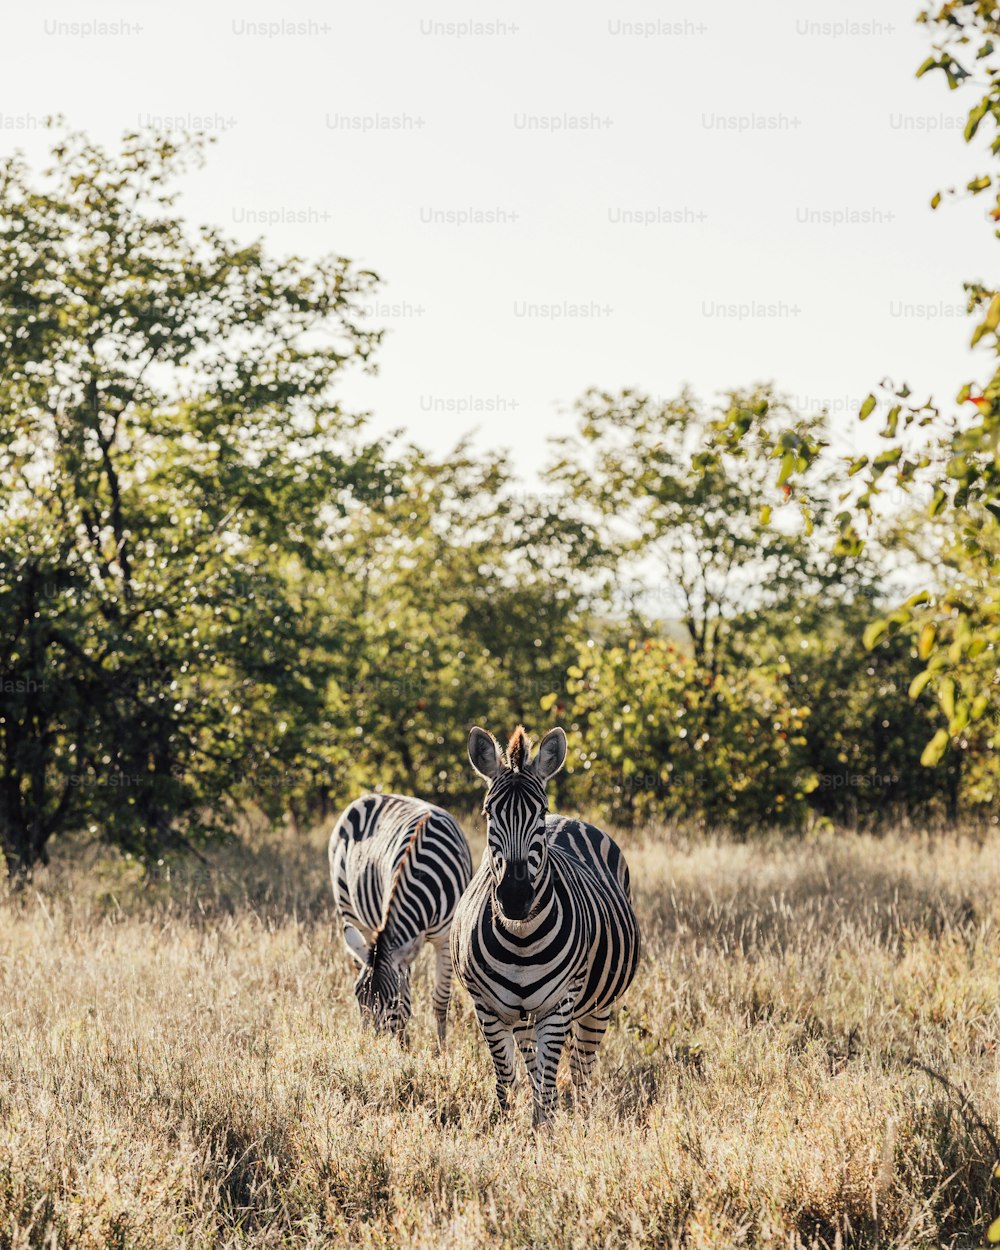 two zebras standing in a field with trees in the background